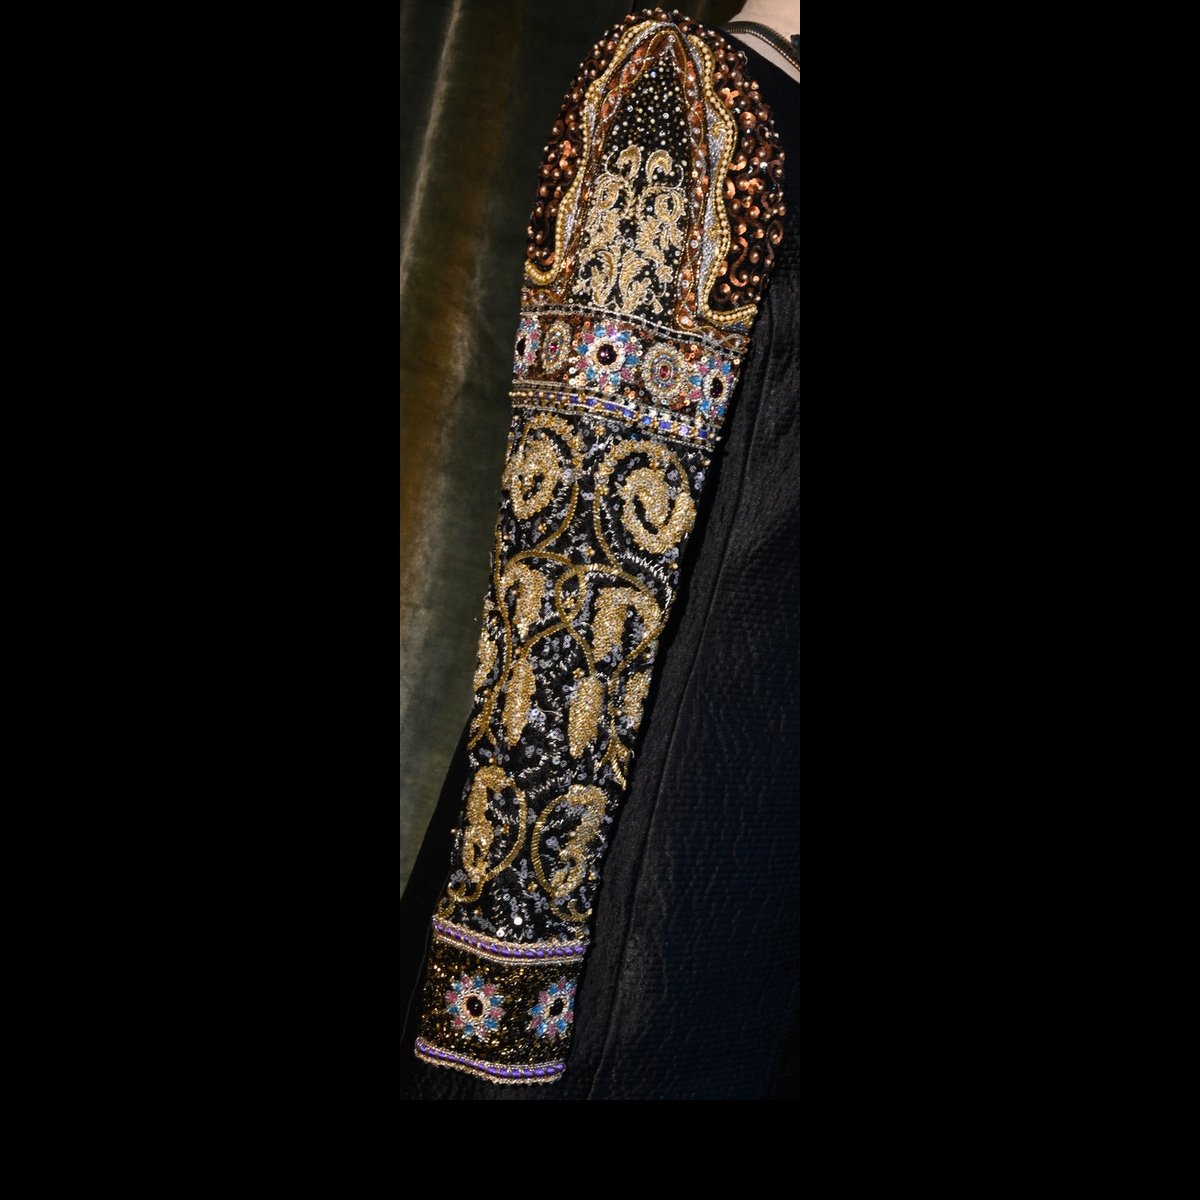 Detail of sleeve of black cocktail dress